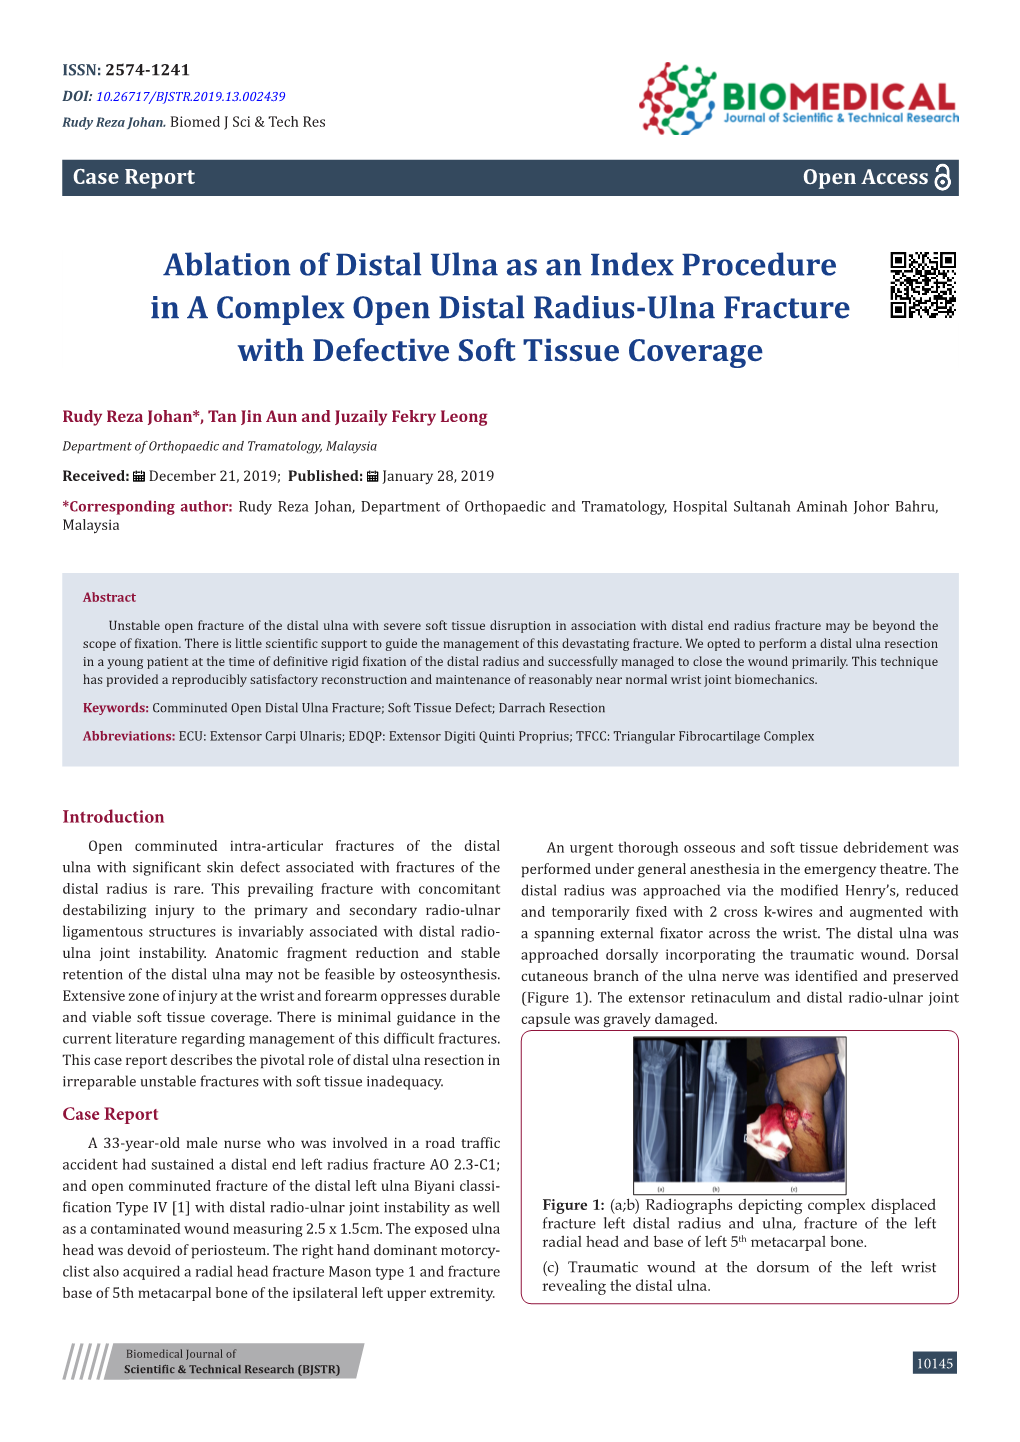 Ablation of Distal Ulna As an Index Procedure in a Complex Open Distal Radius-Ulna Fracture with Defective Soft Tissue Coverage